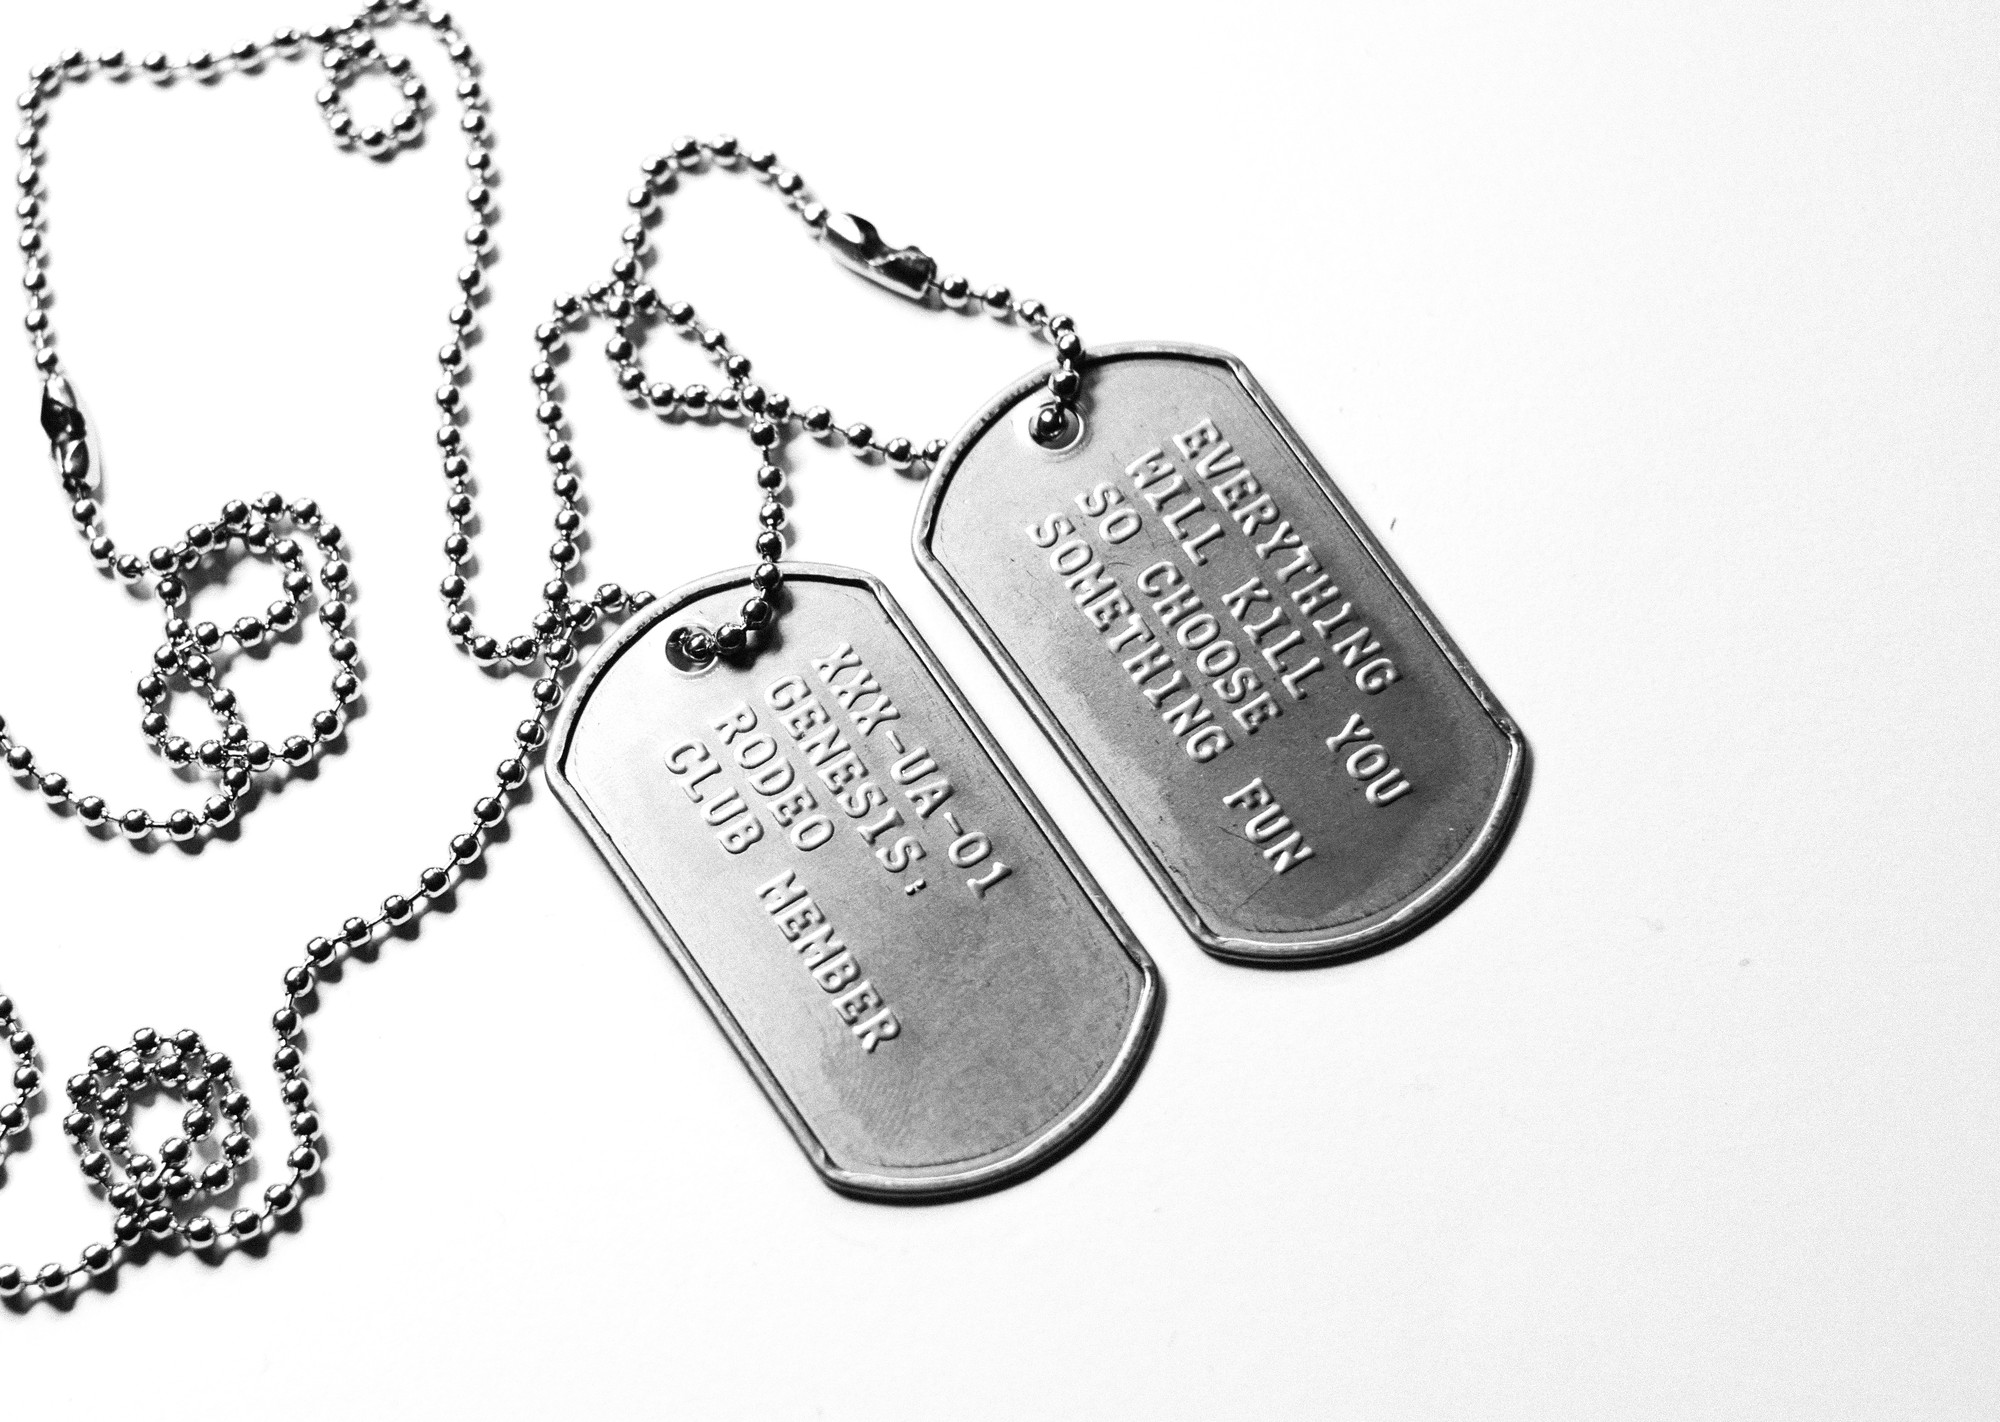 Genesis® - army tags necklace with unique serial number